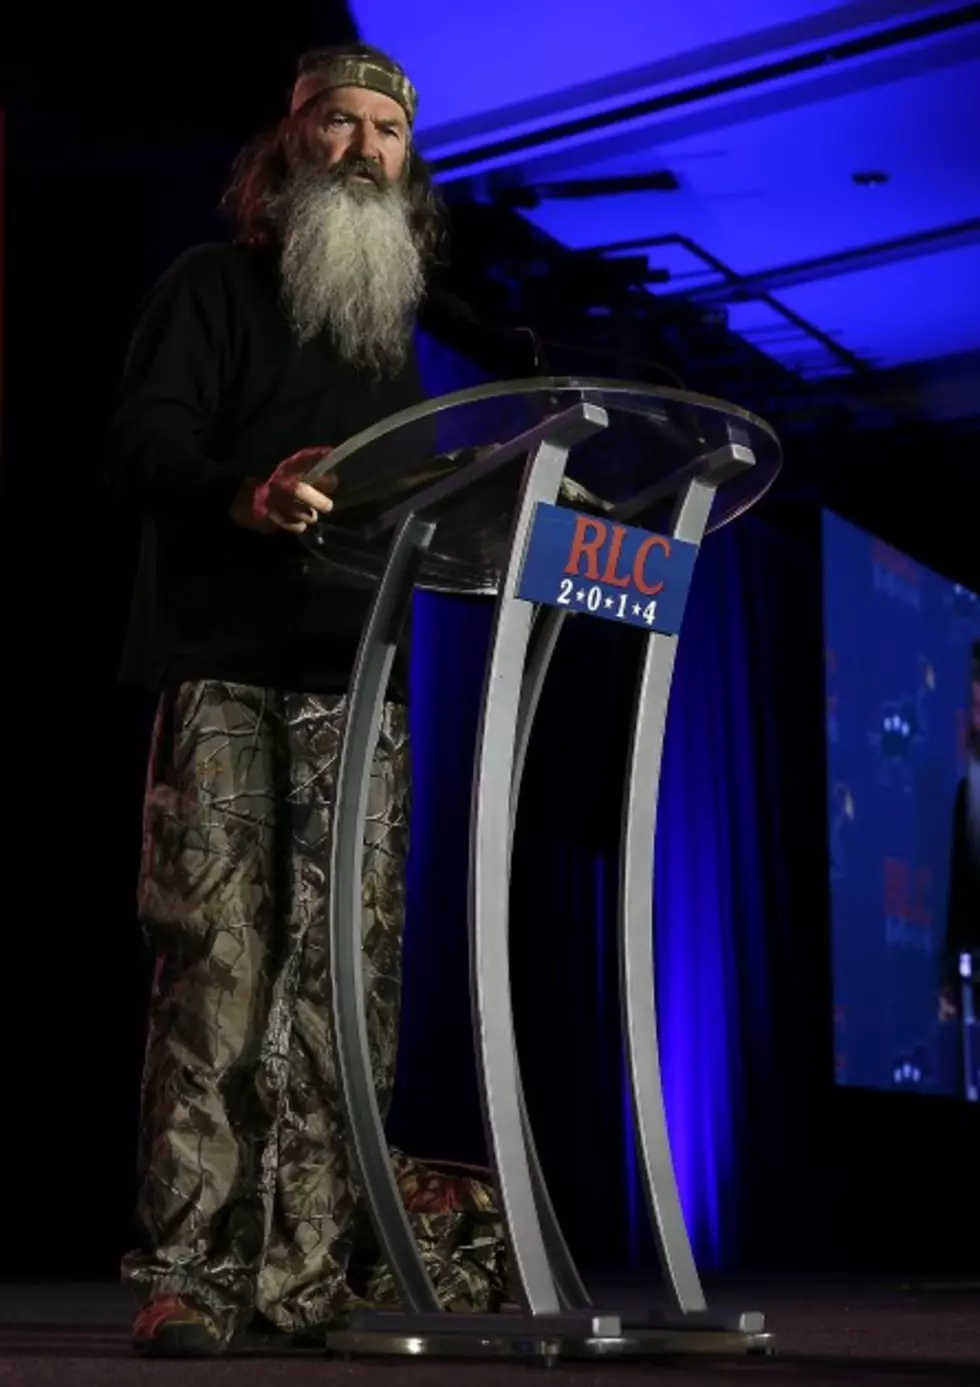 Phil Robertson Rocks The House at New Orleans GOP Gathering